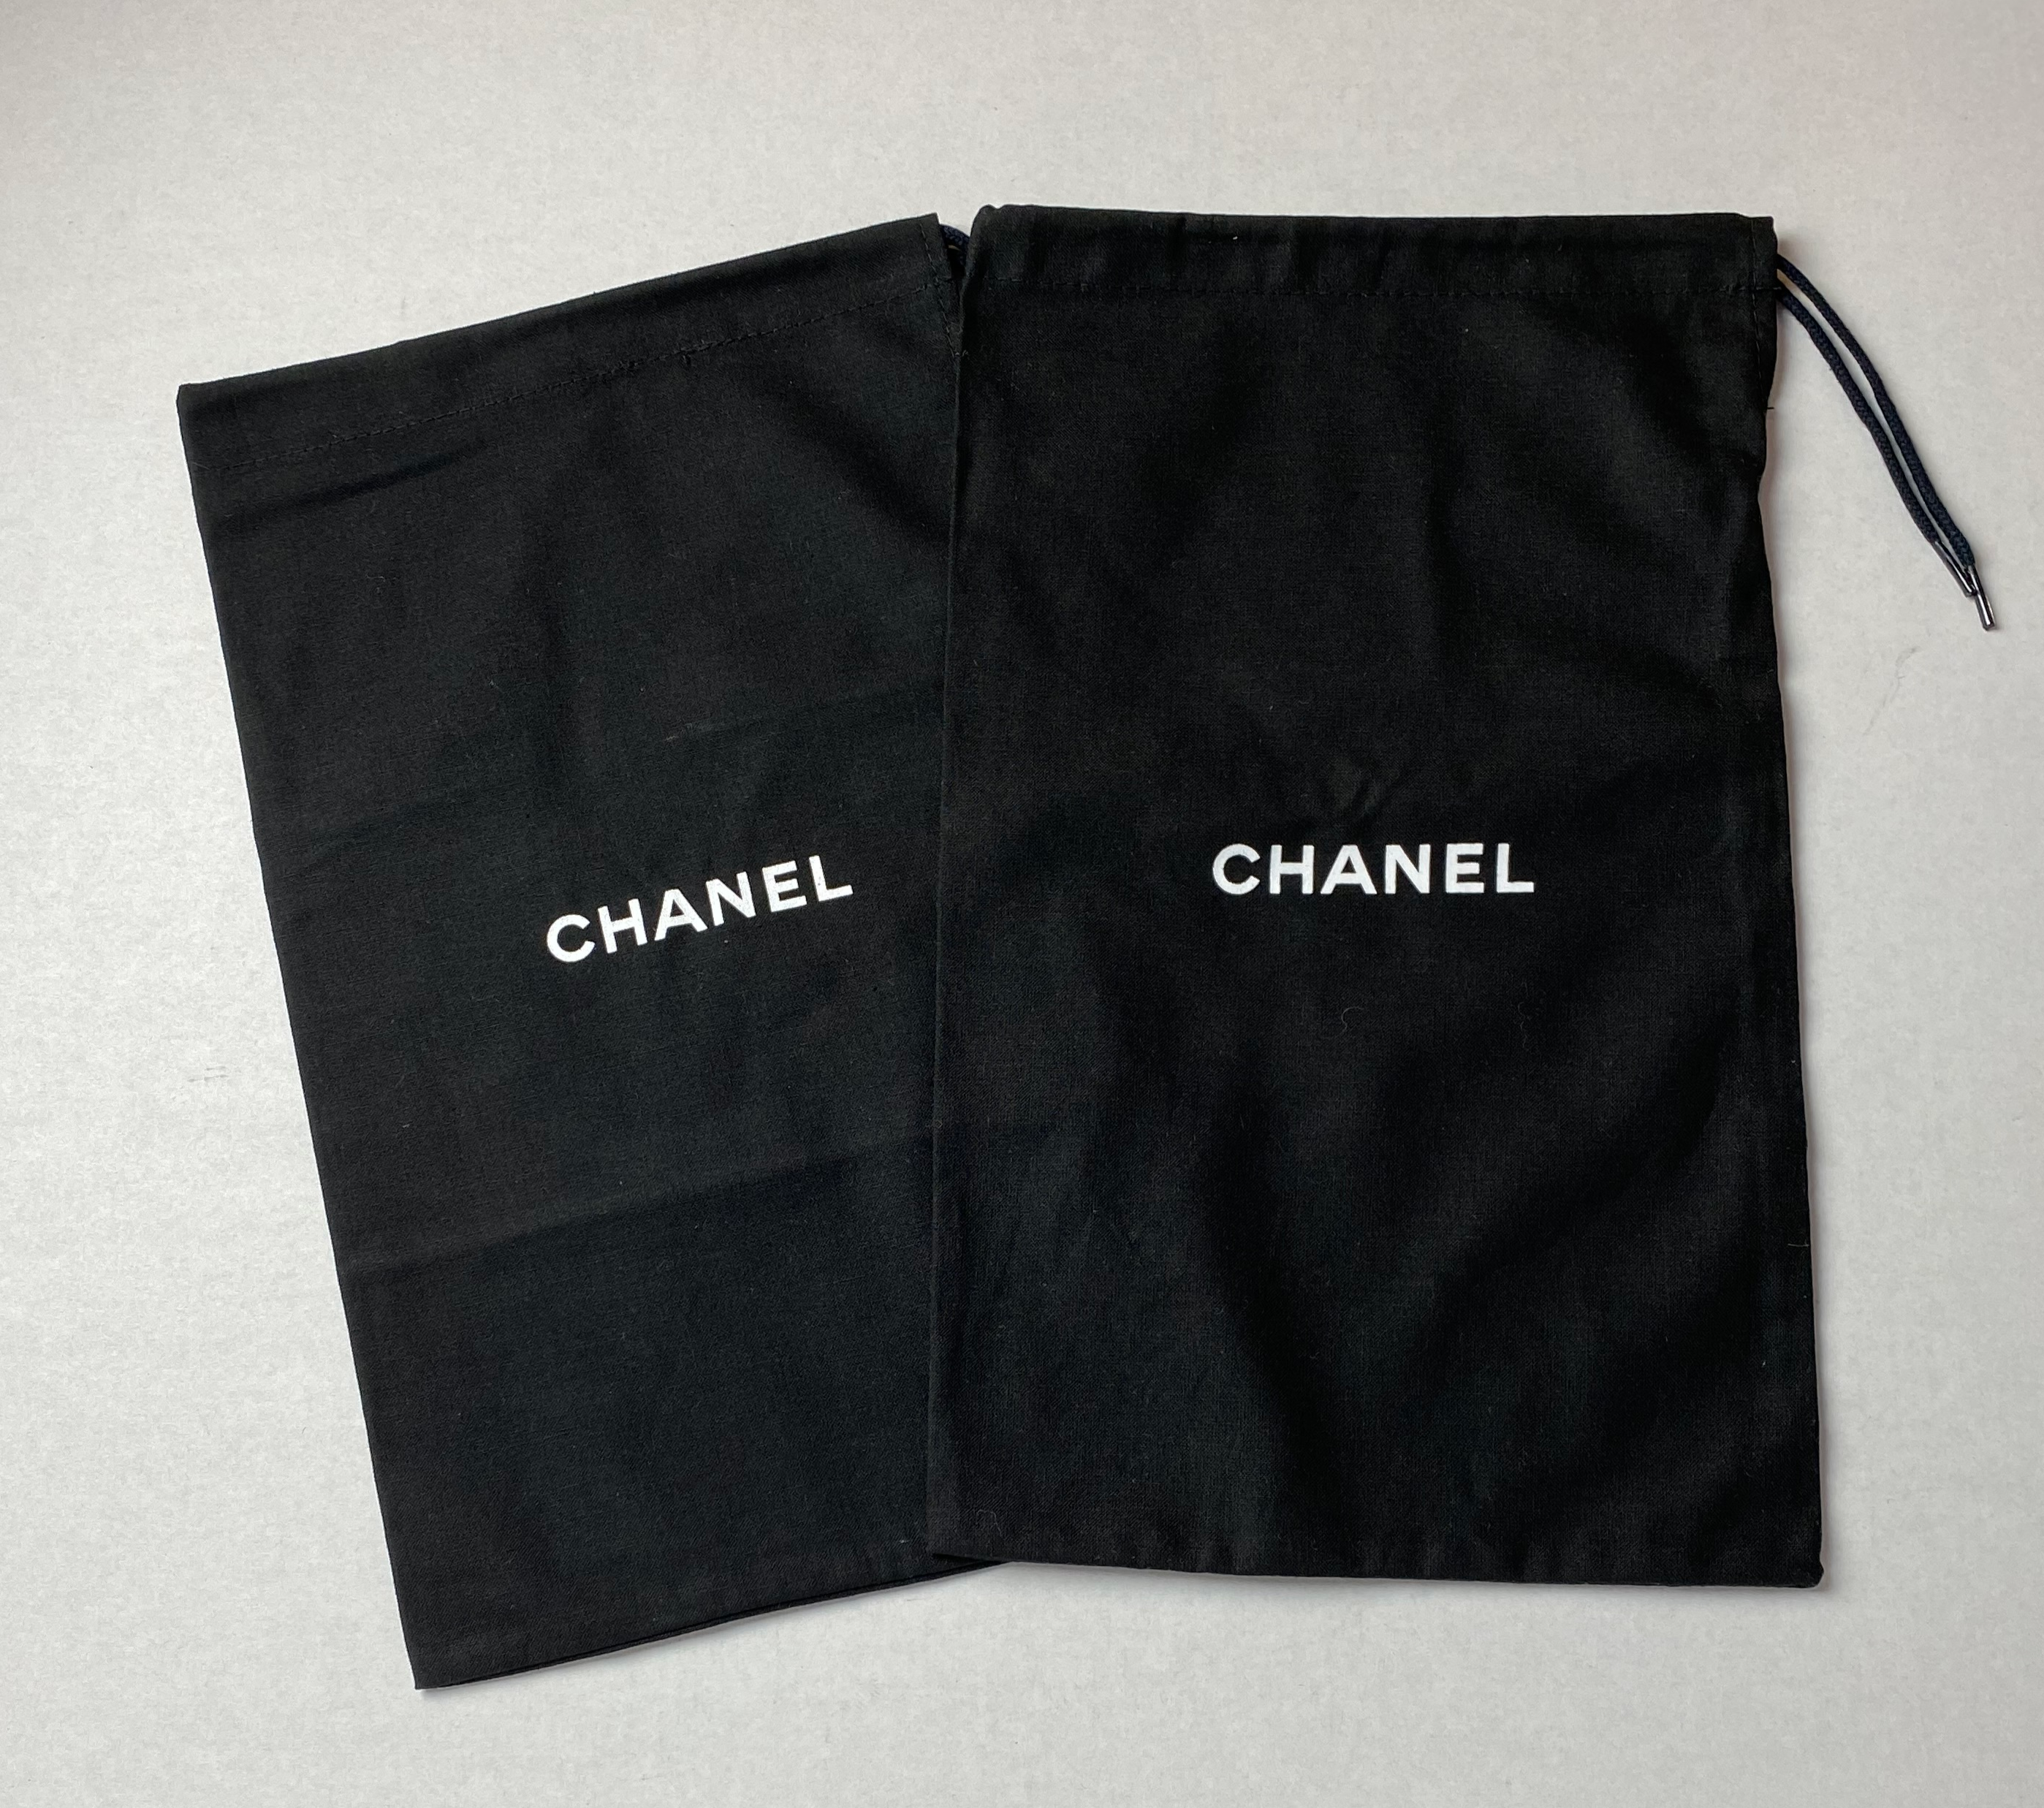 CHANEL, Accessories, Chanel Authentic Drawstring Dust Bag 55x6 Bag Only